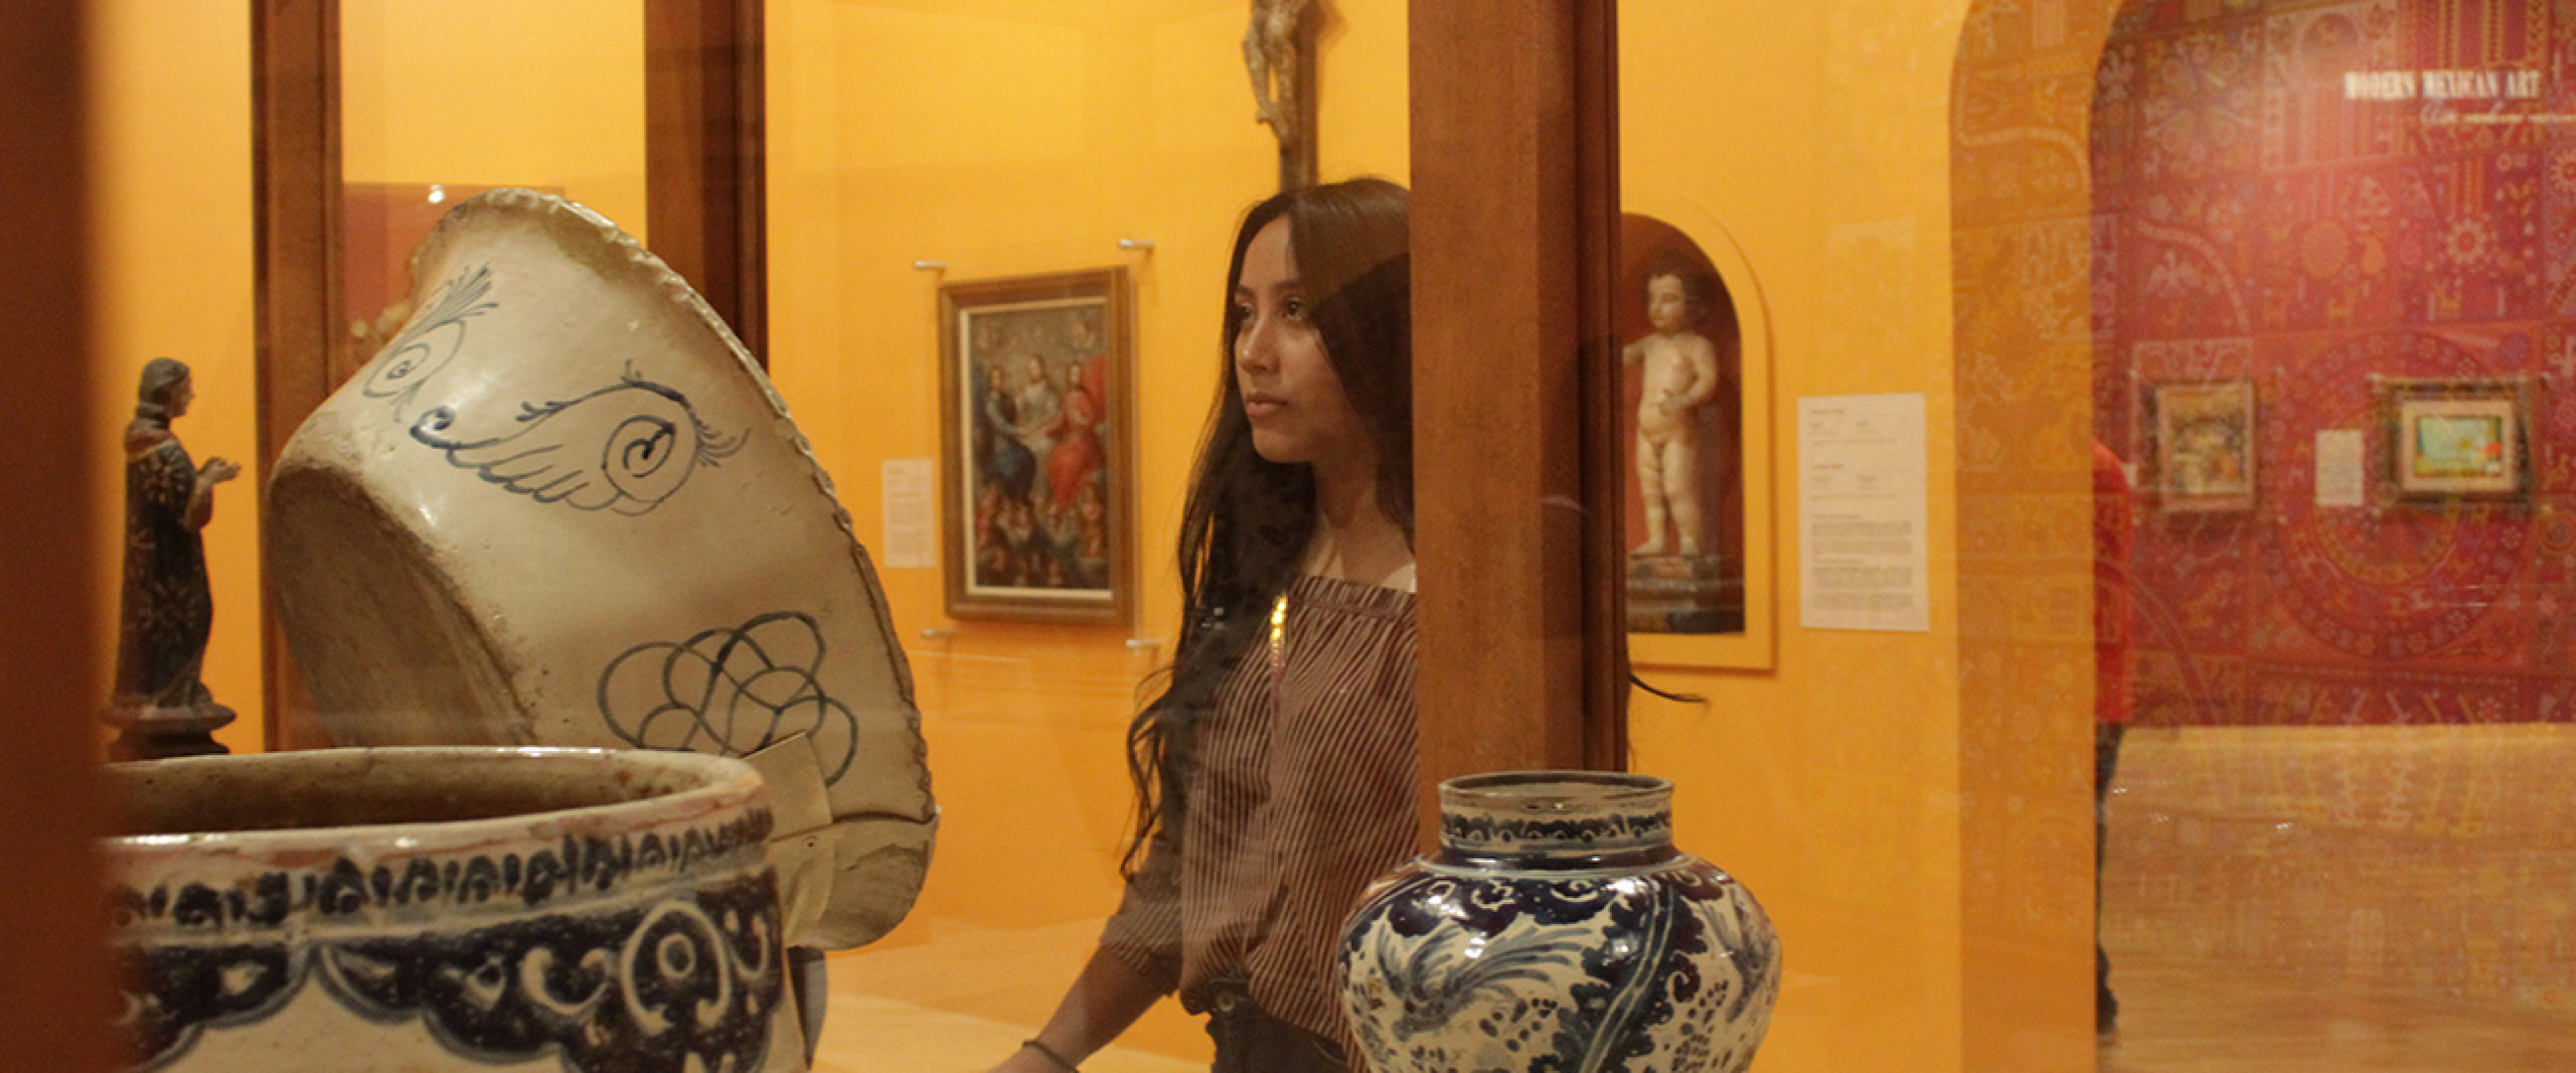 Student standing and looking into glass case with Mexican artifacts.